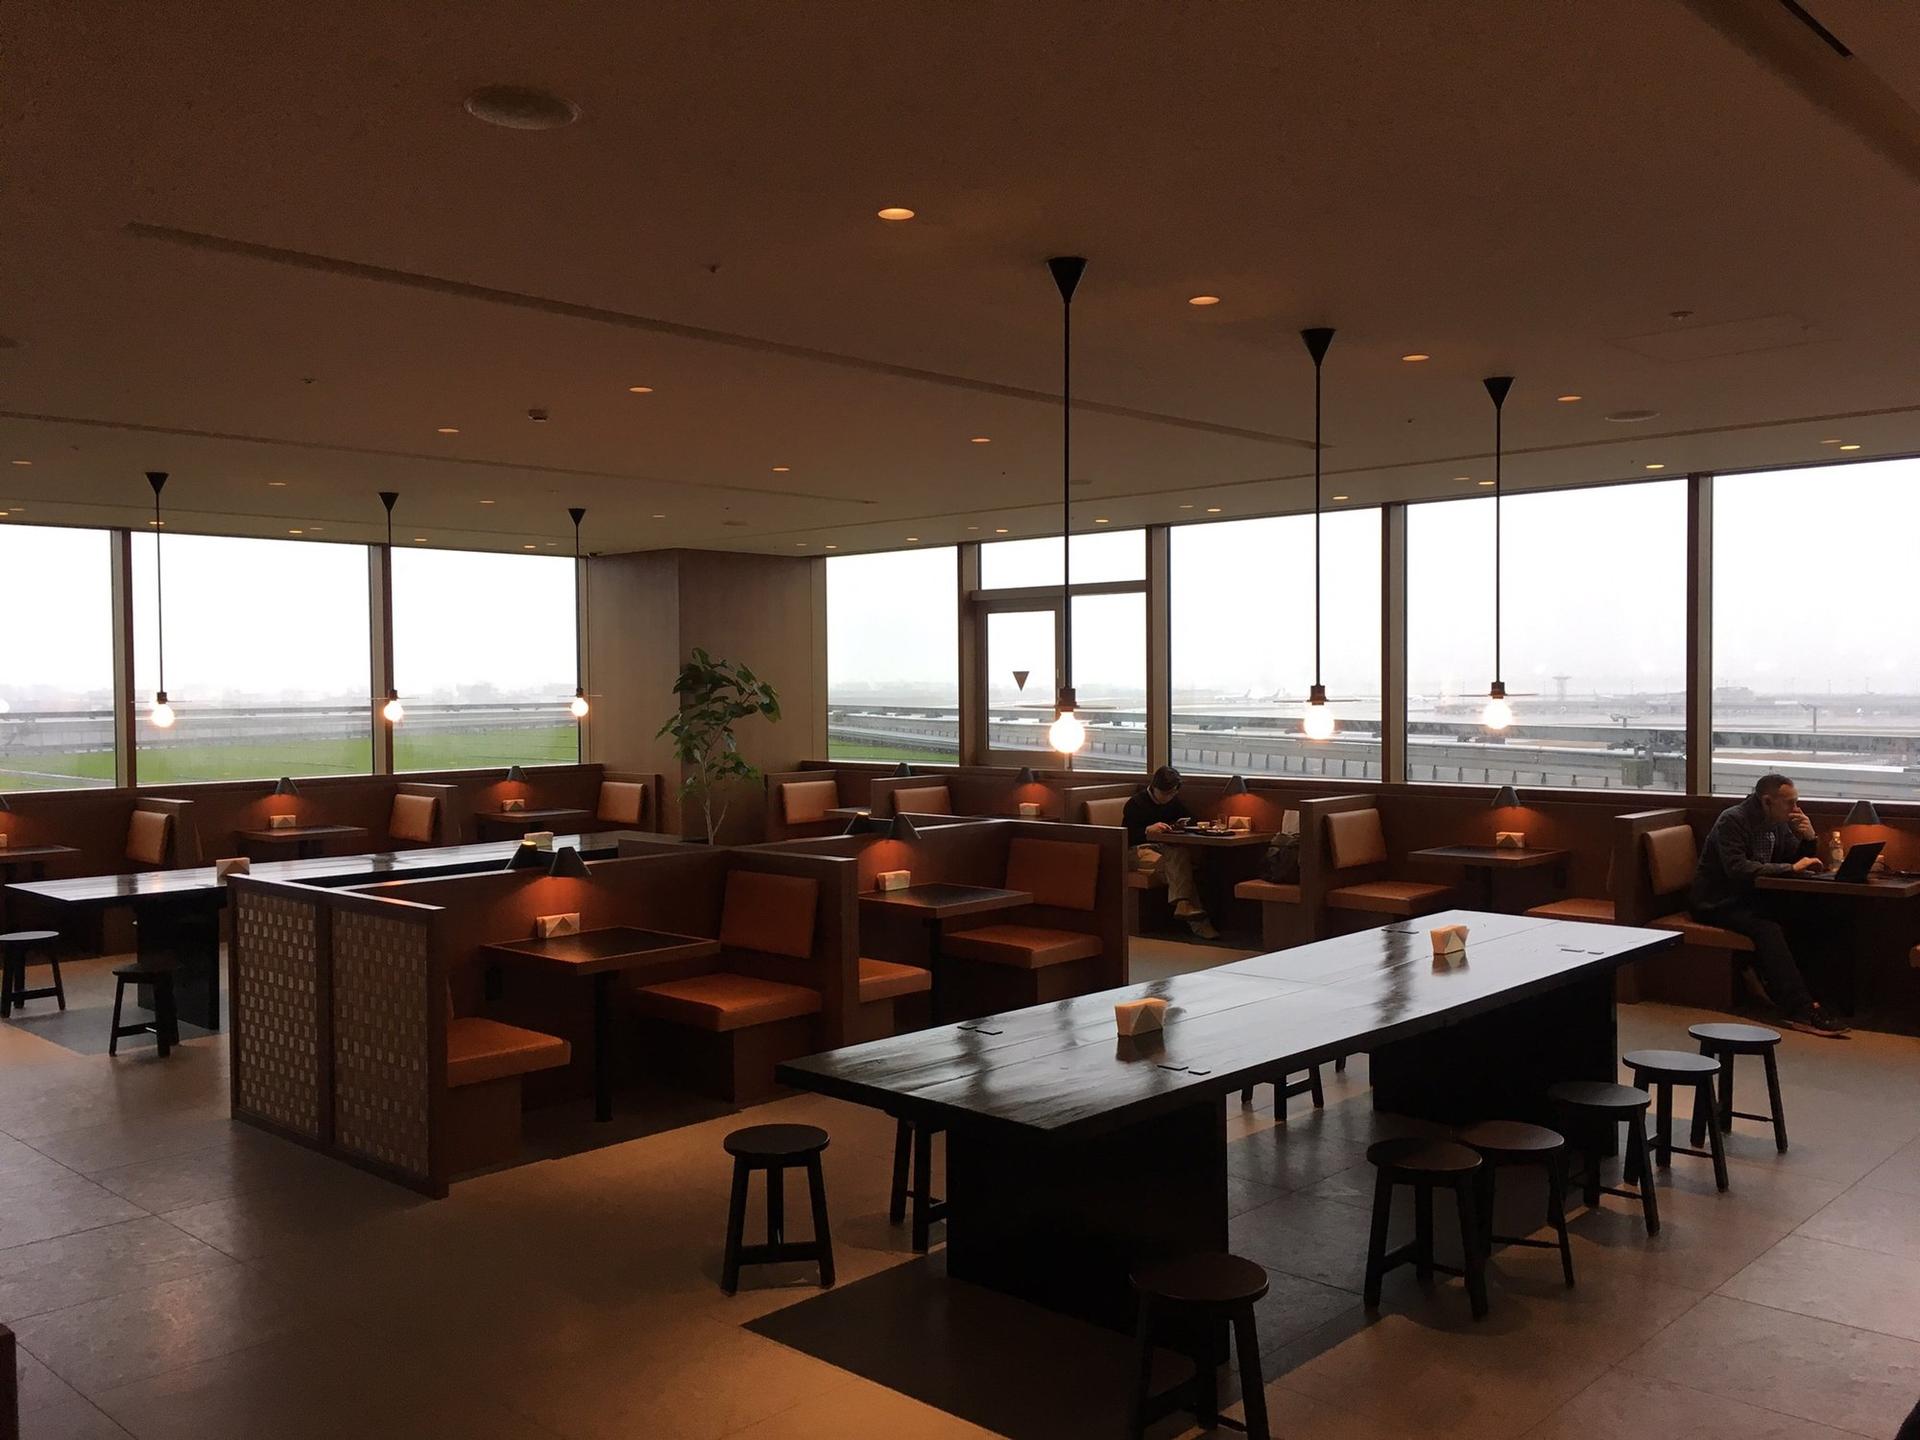 Cathay Pacific Lounge image 39 of 49